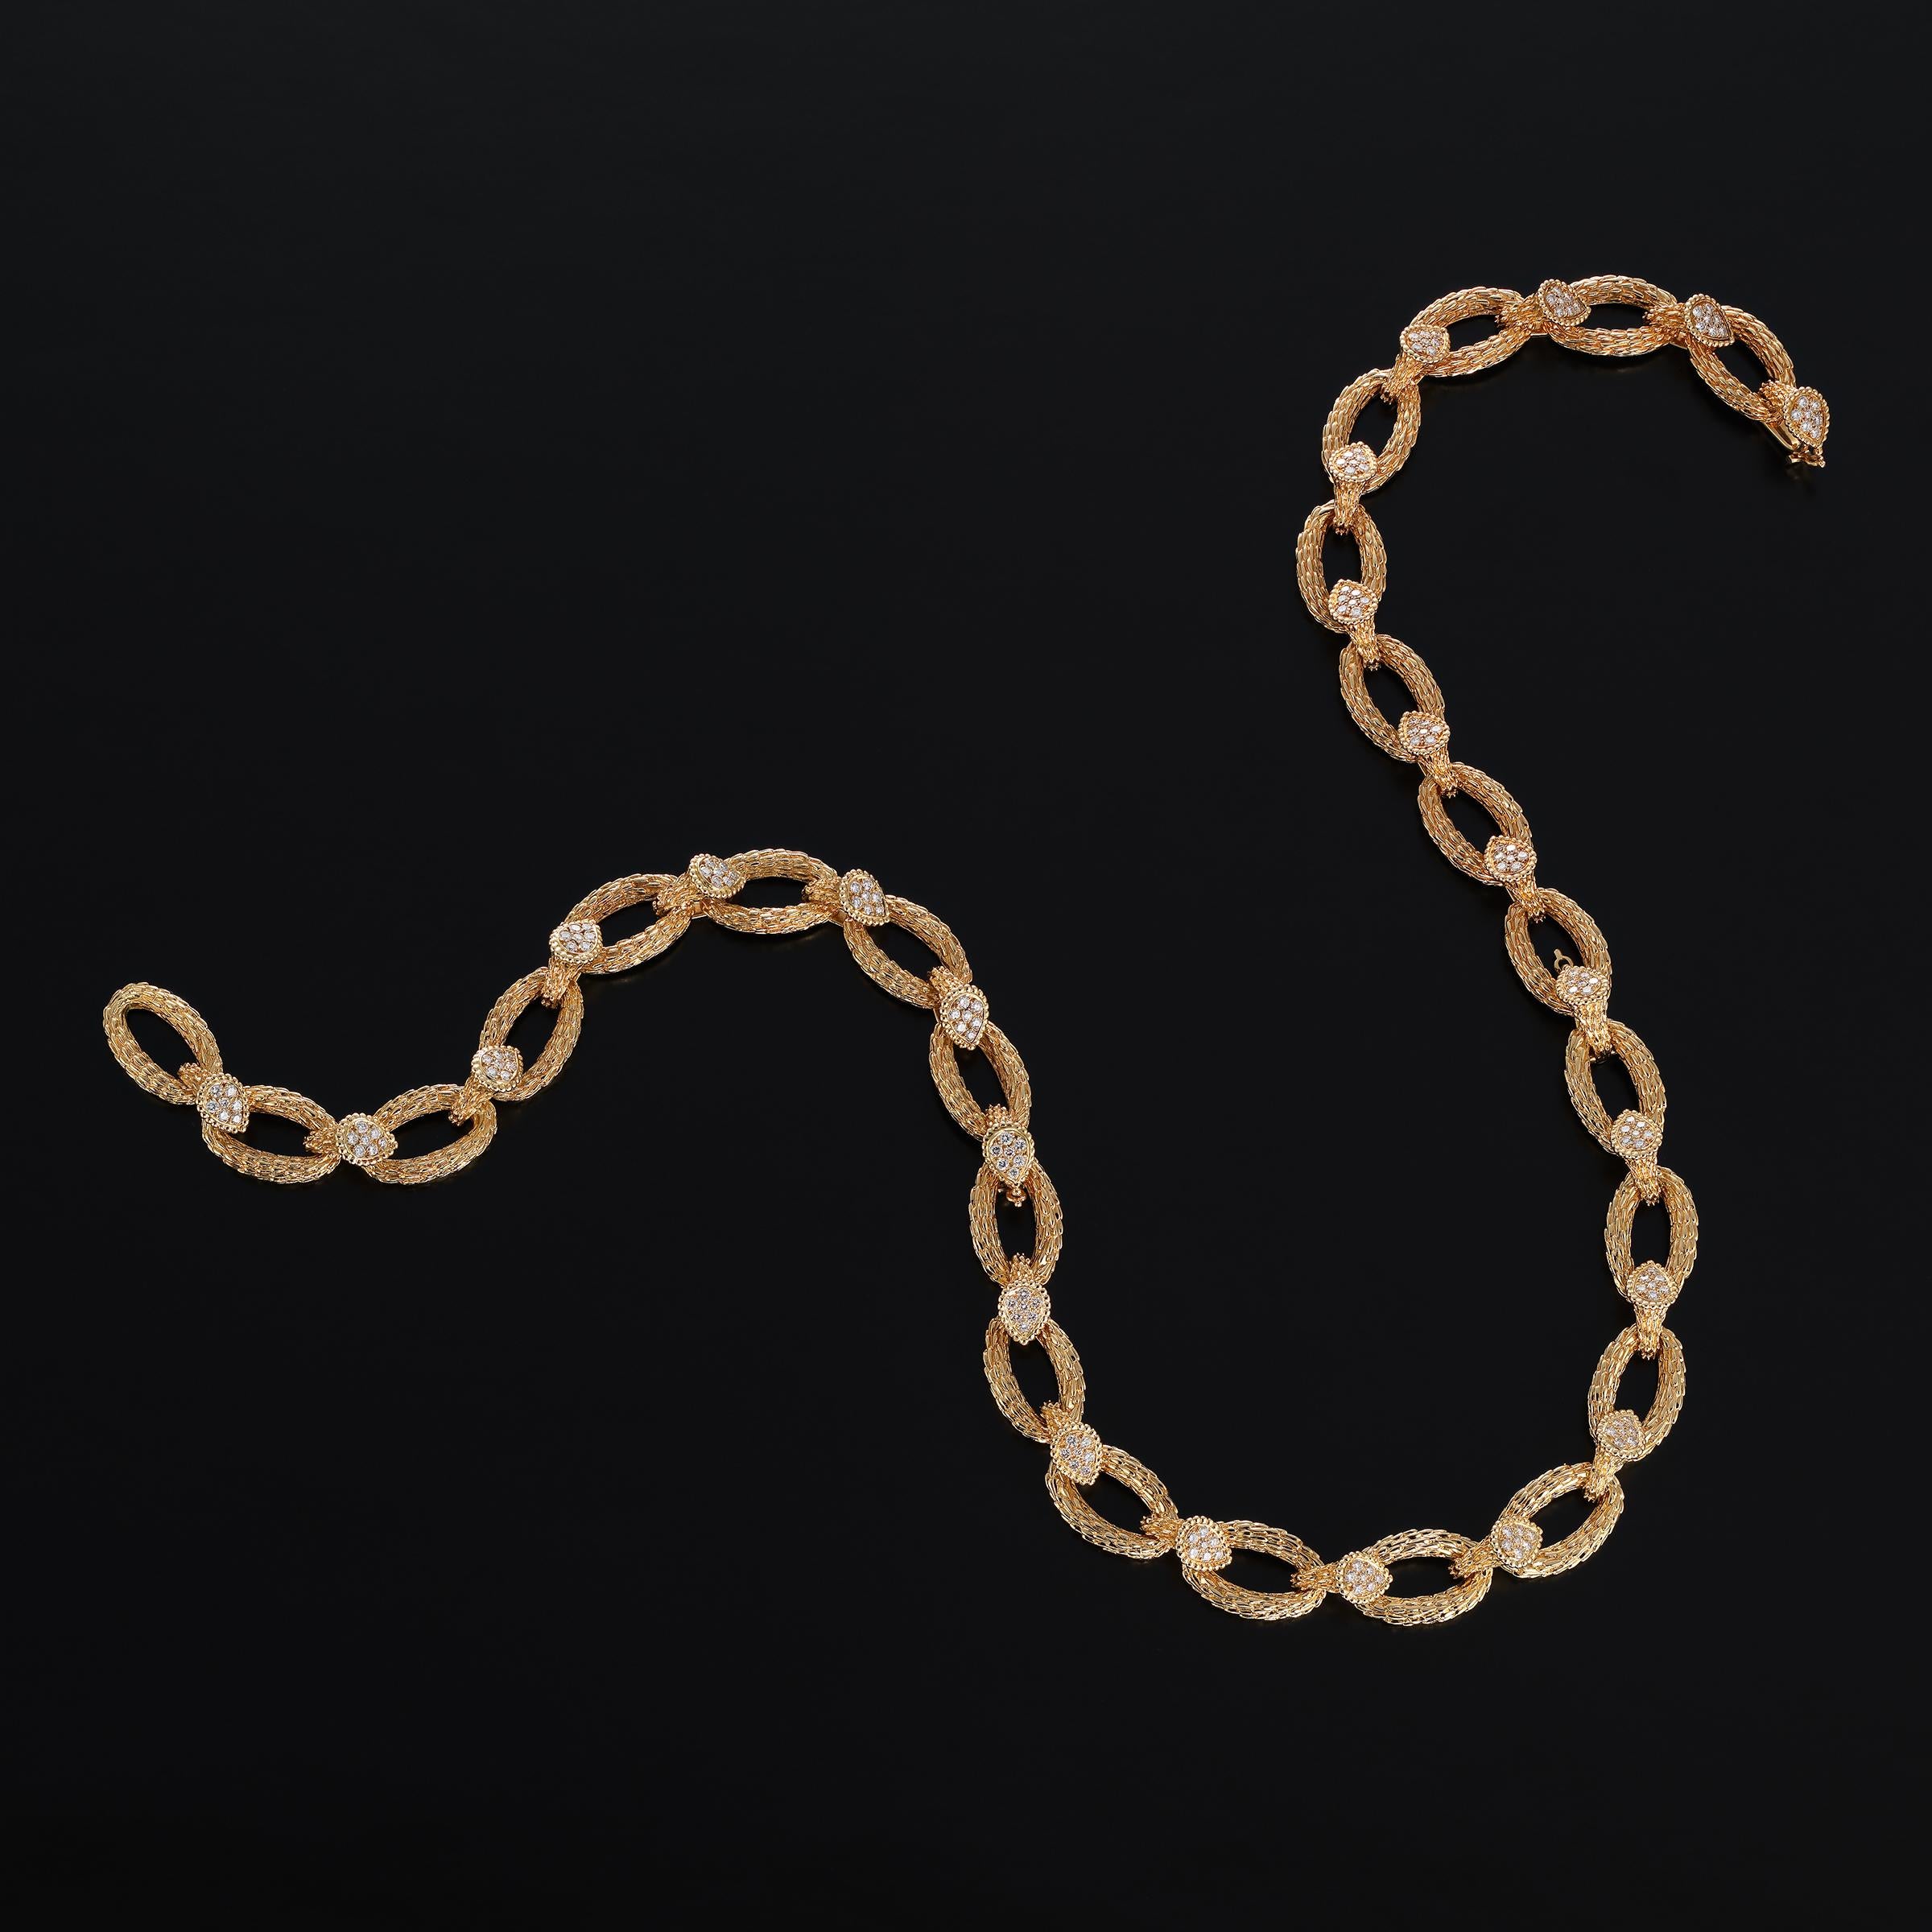 Splendid Boucheron Serpent Boheme necklace and bracelet combination crafted in 18 karat yellow gold and featuring approximately 9 carats of sparkling pave-set diamonds. A wonderfully versatile piece that can be worn as either: 1) a longer